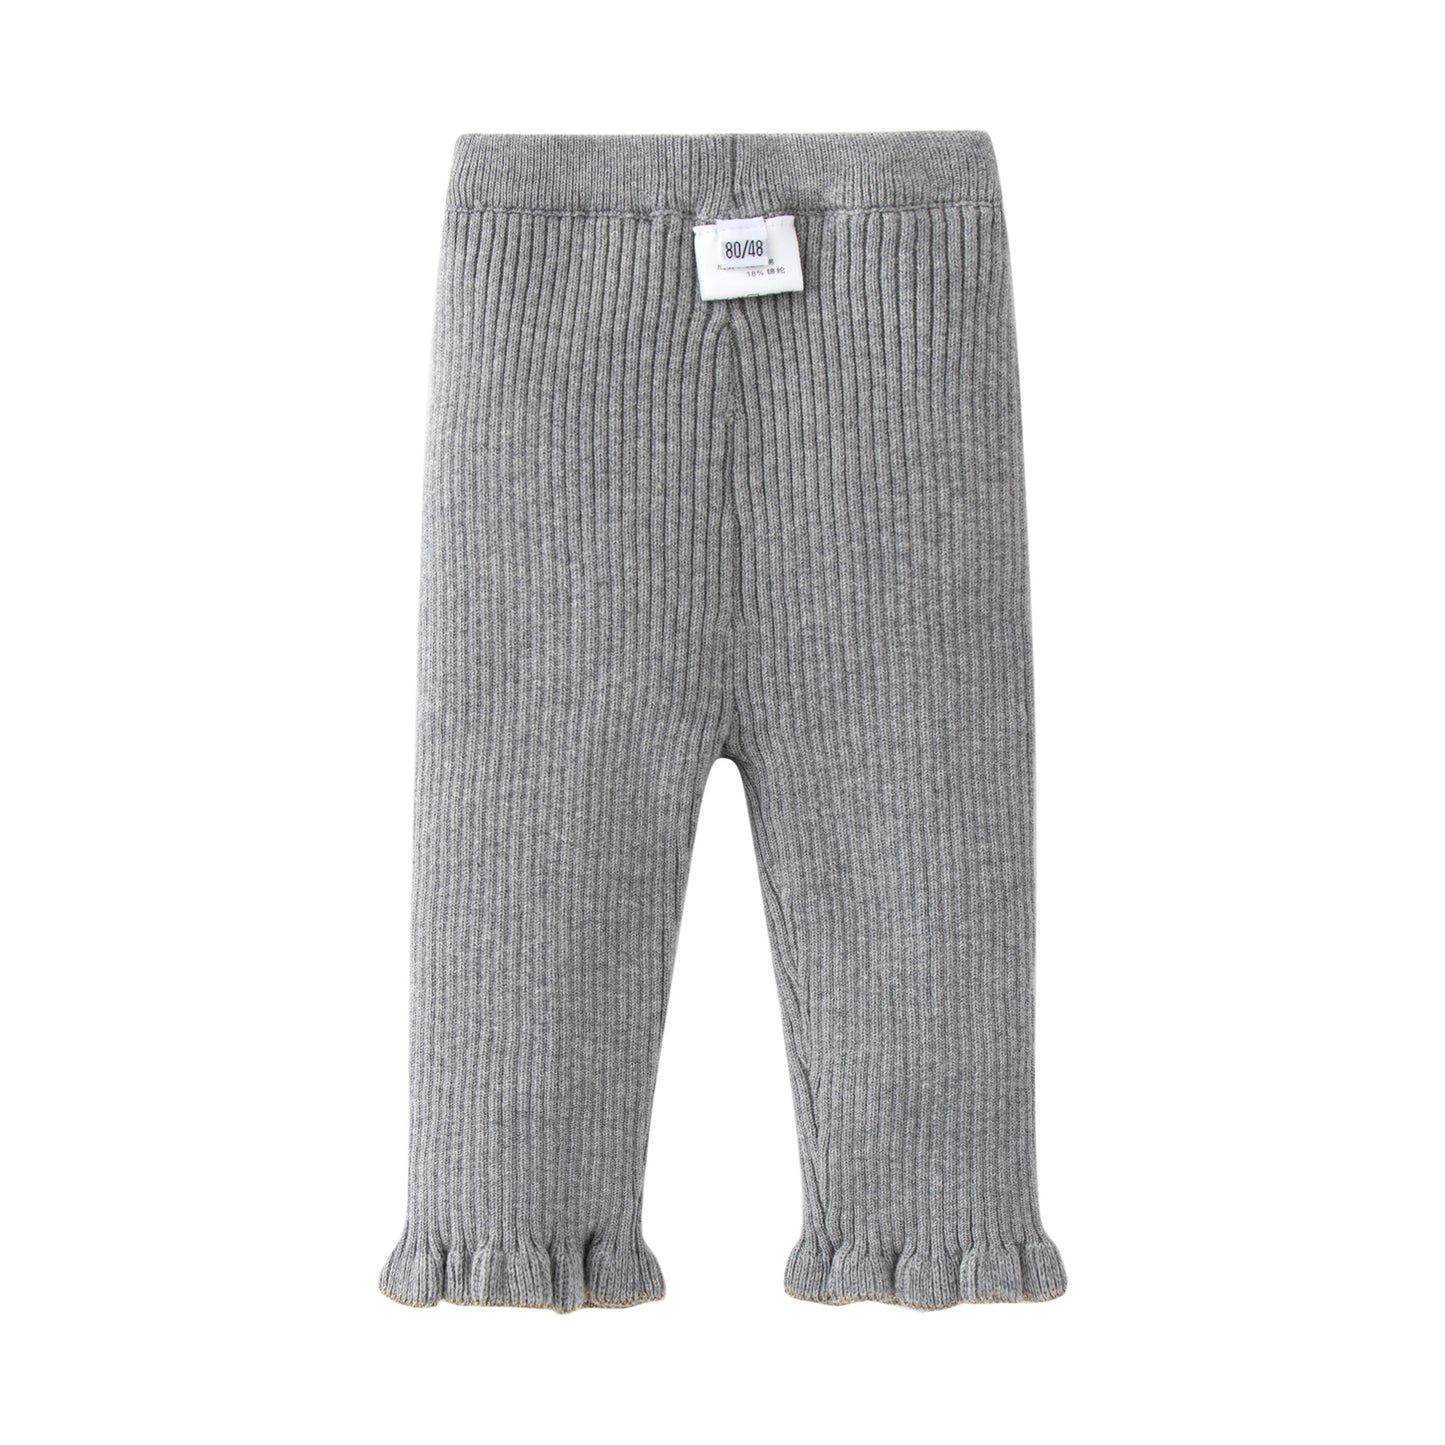 Baby Girl Bow Tie Patched Design Comfy Pants